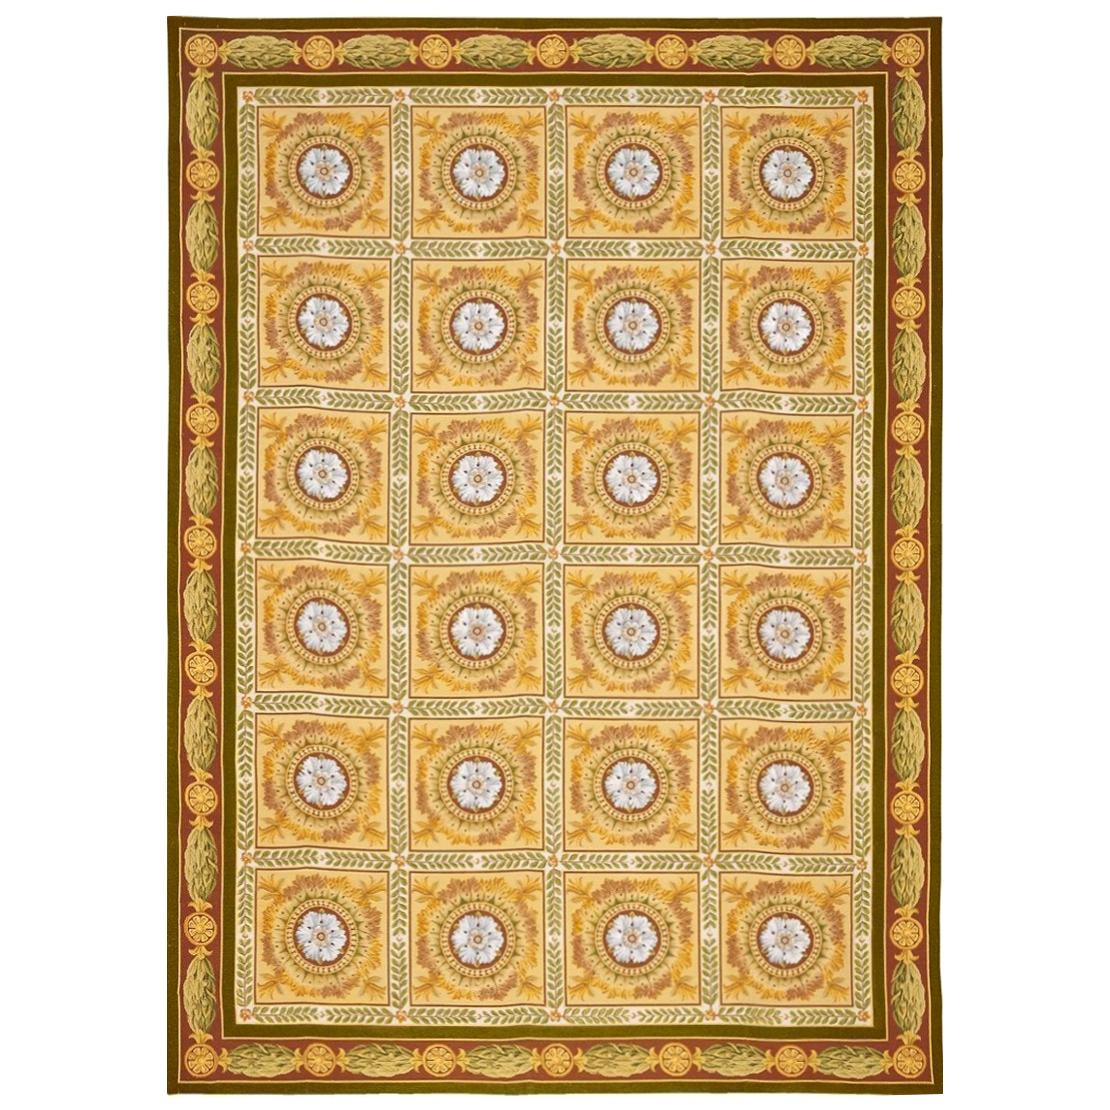 Traditional Handwoven Wool Area Rug  9'11 x 13'9 For Sale